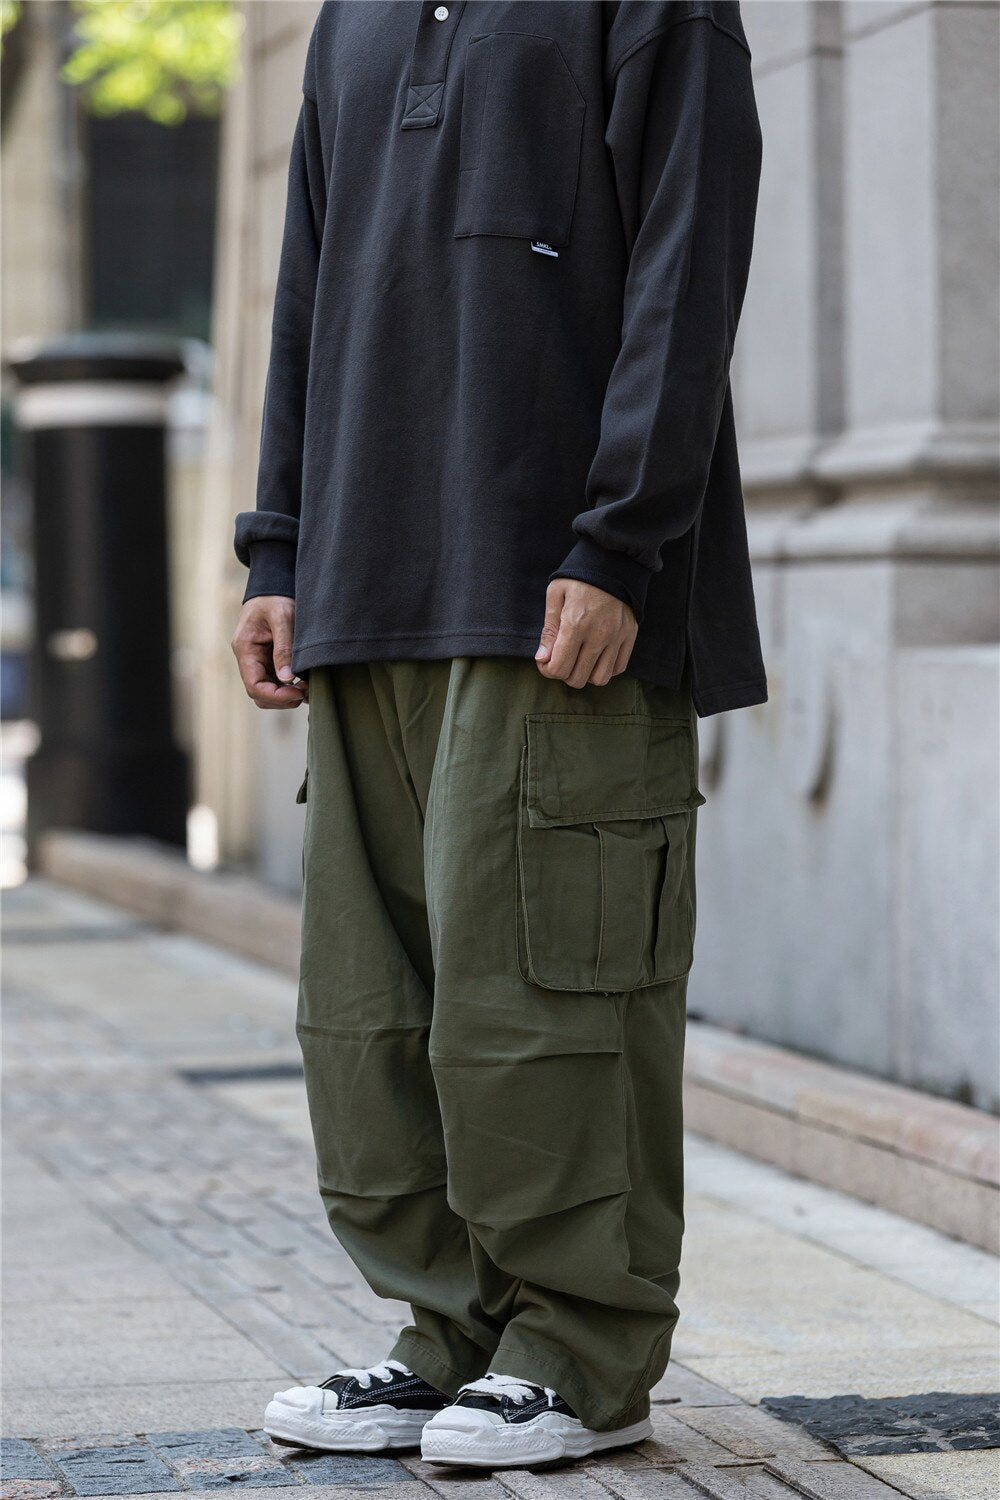 hypestyle | Cargo pants outfit men, Pants outfit men, Mens outfits